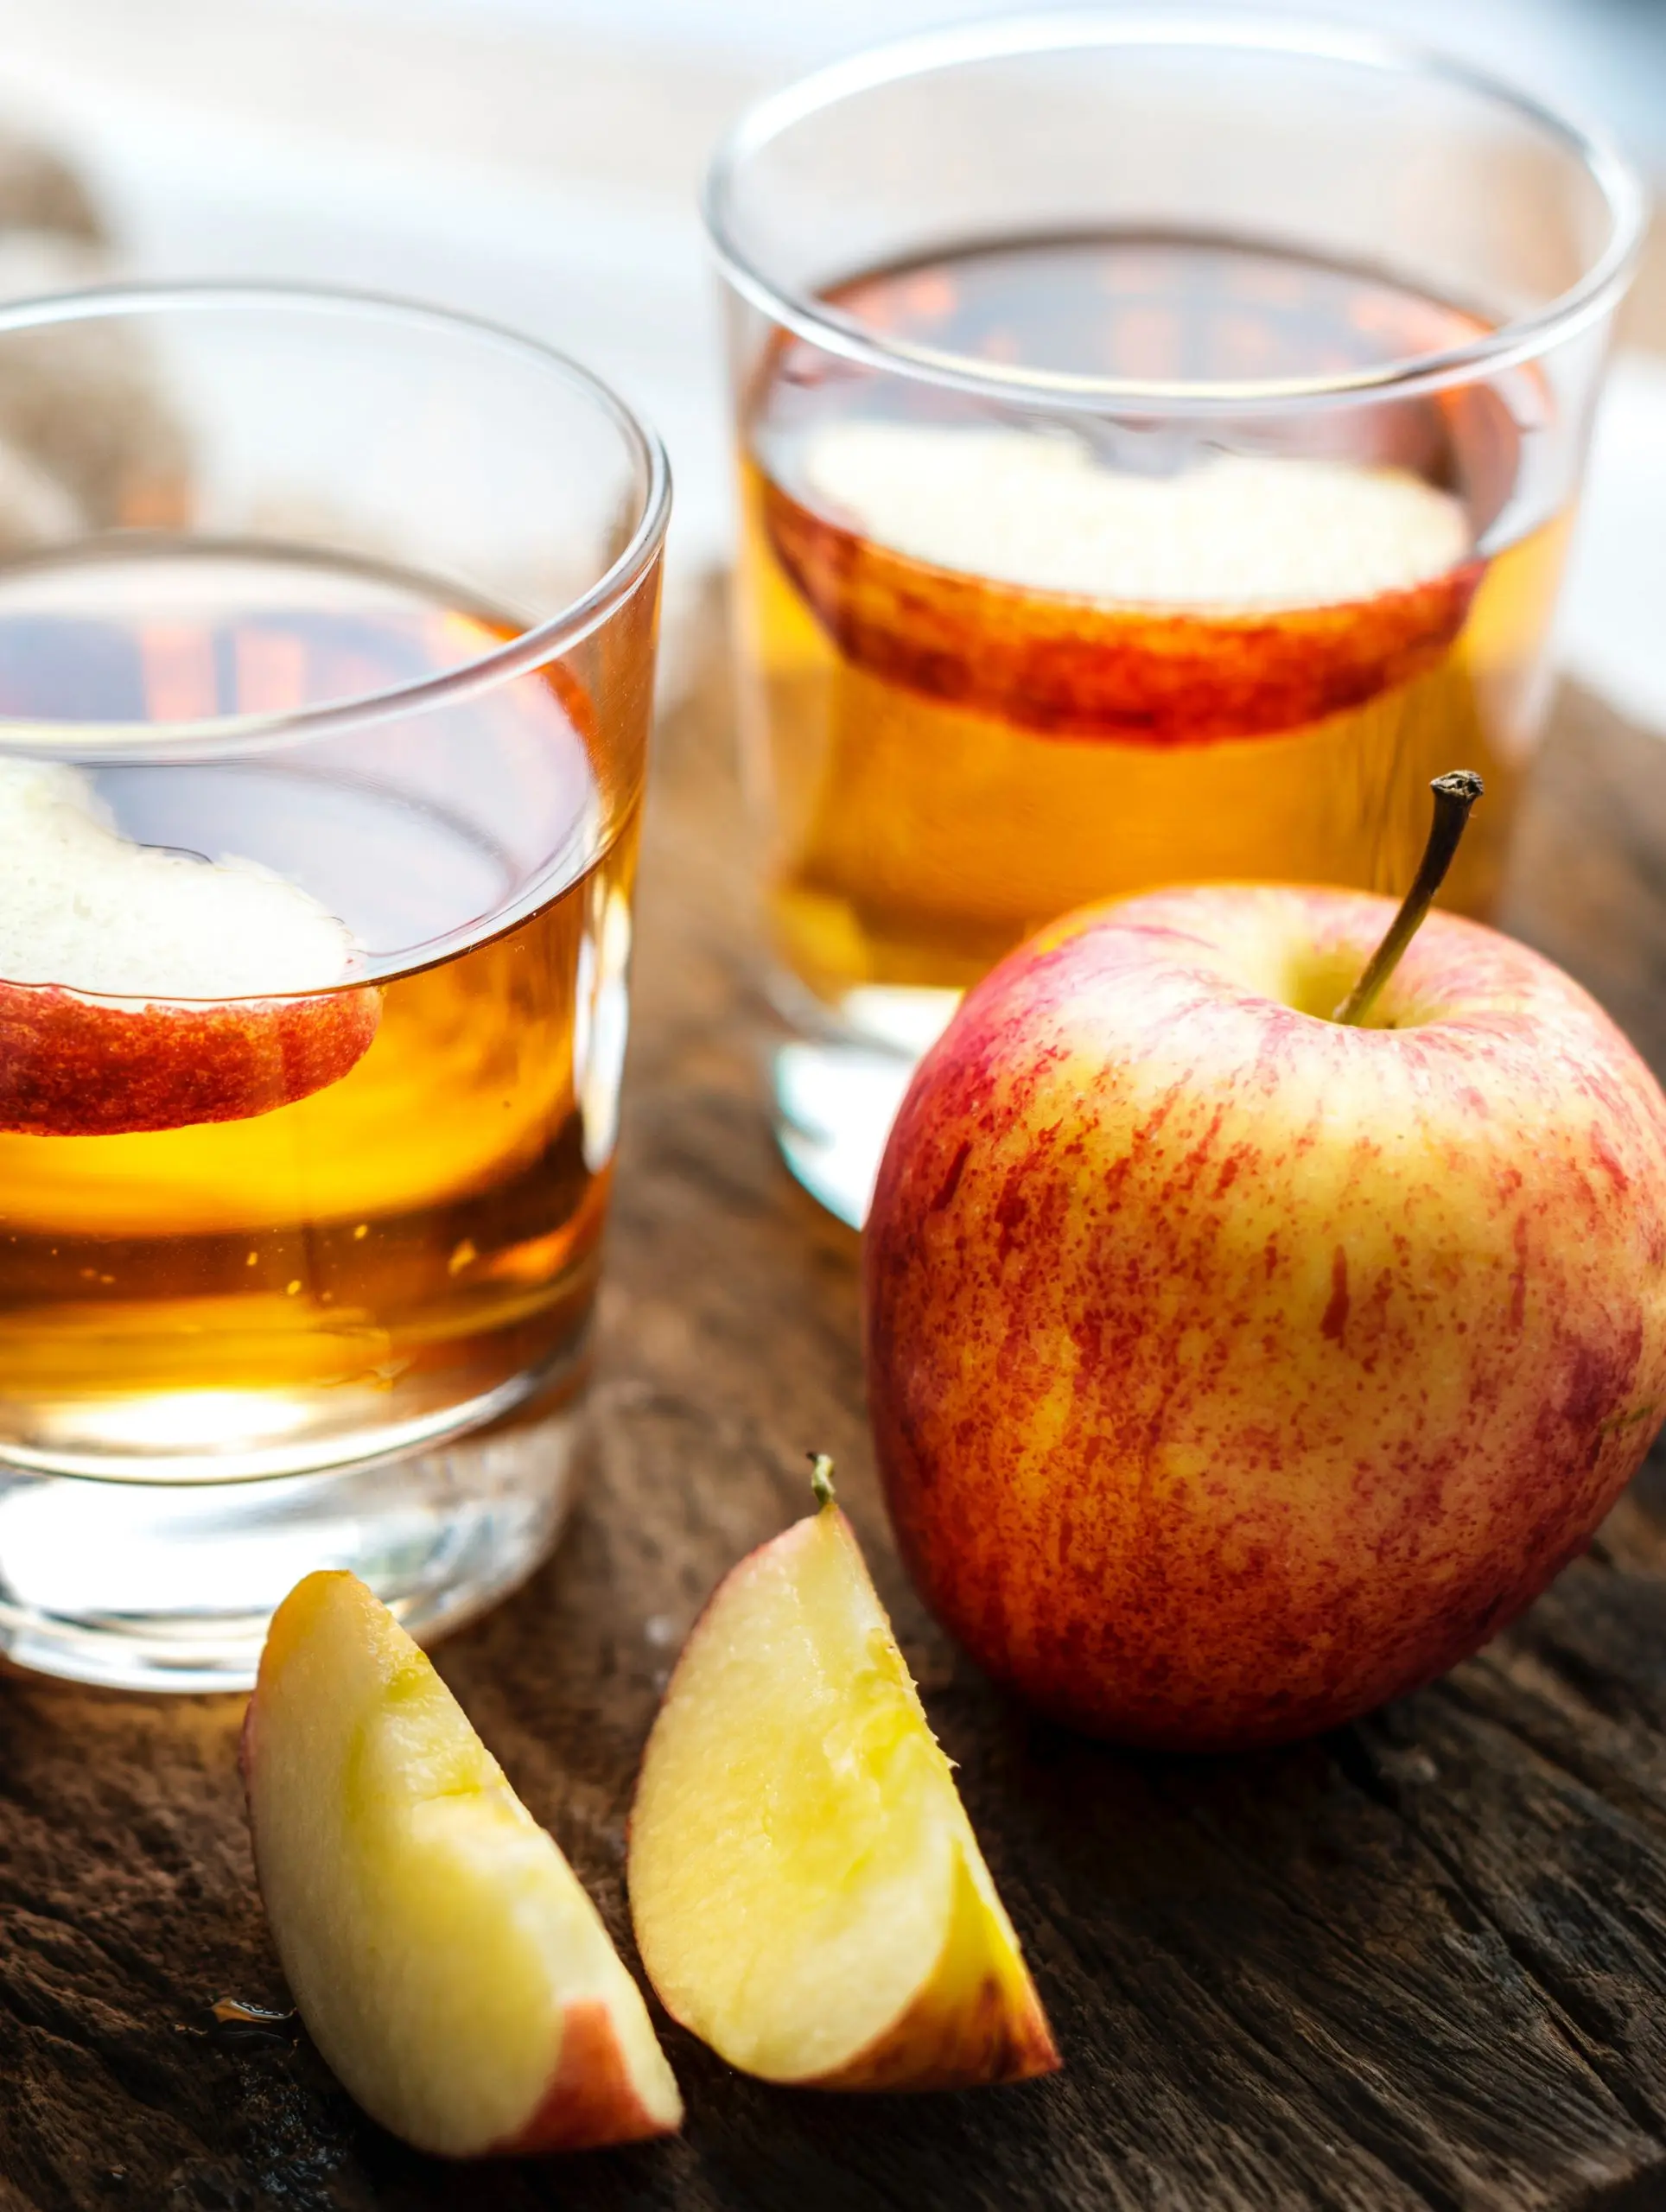 5 blends of apple tea for better health and well-being during the cold season